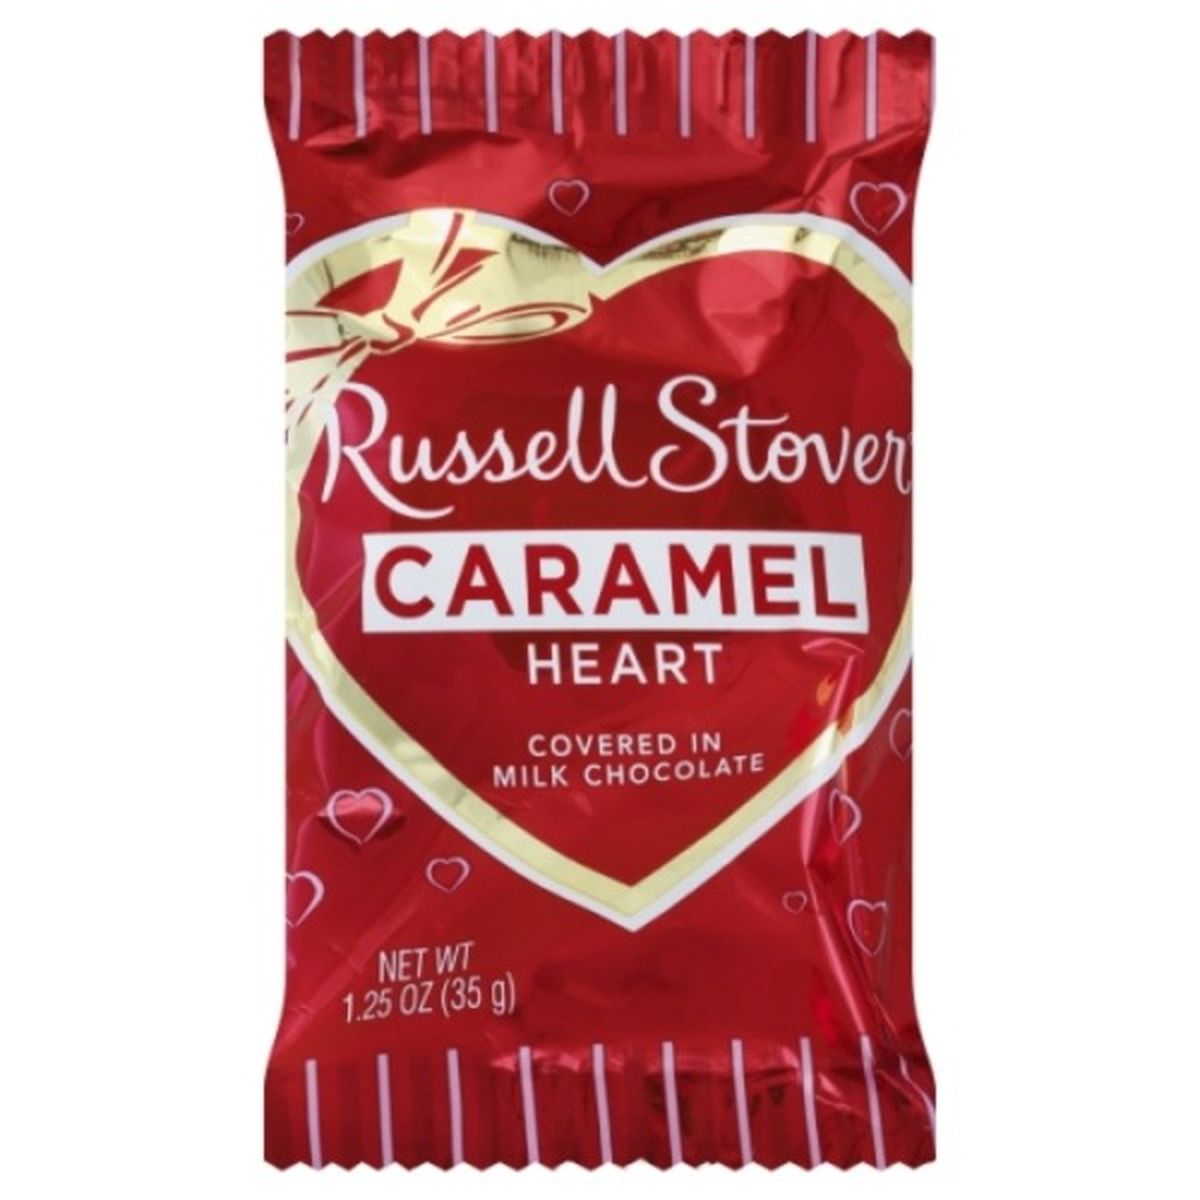 Calories in Russell Stover Caramel, Heart